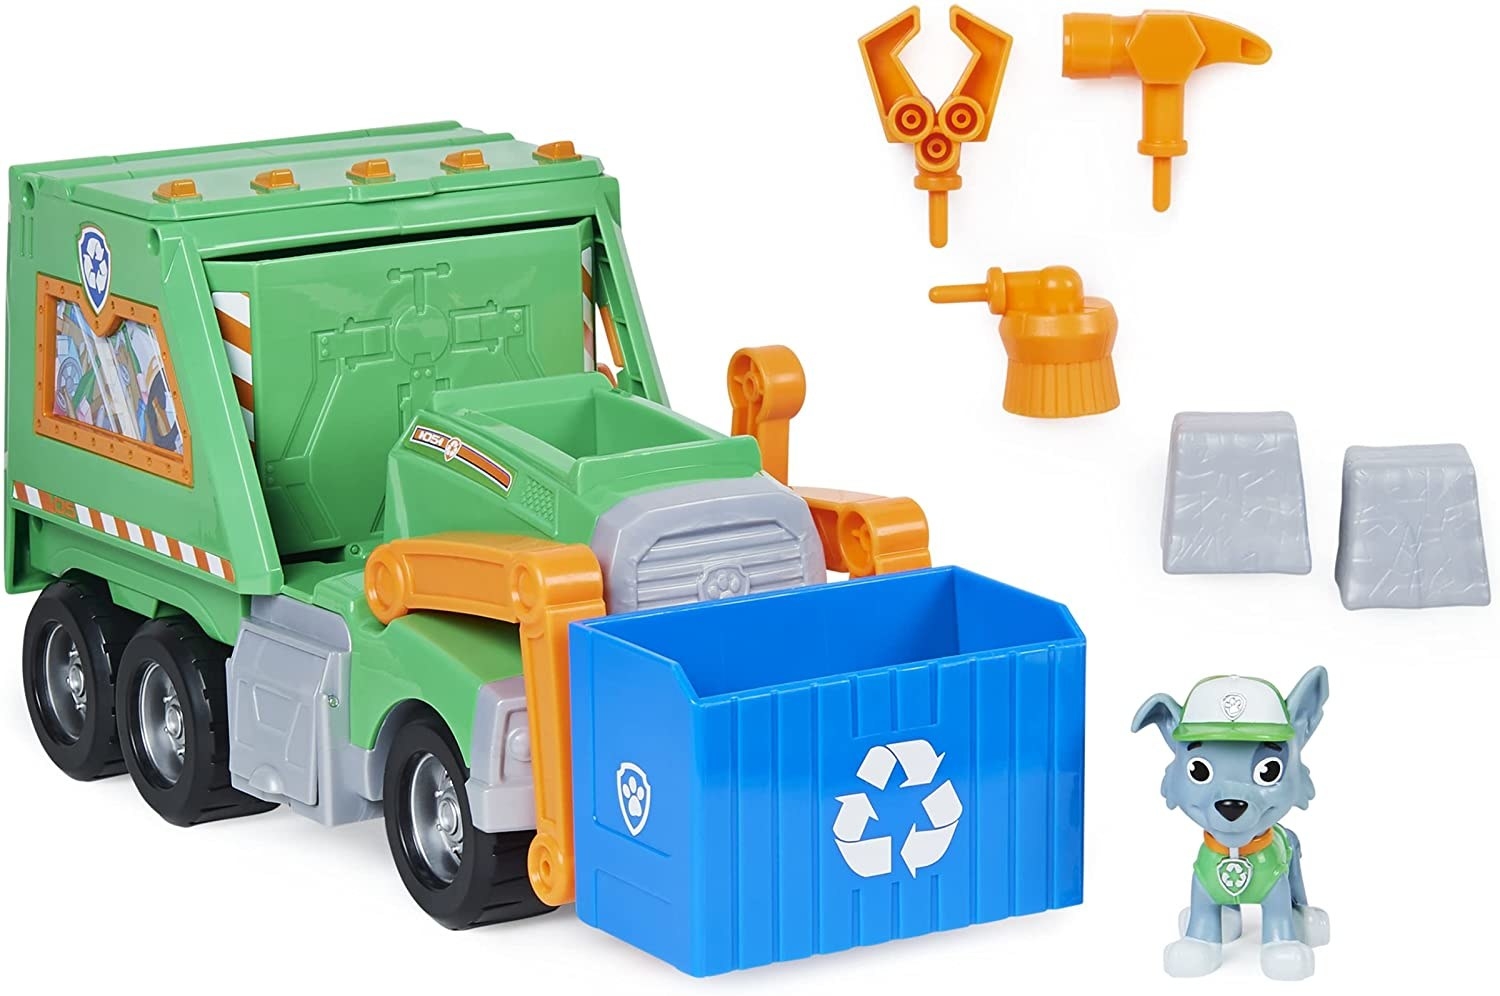 Rocys reuse it truck with the rocky collectible figure